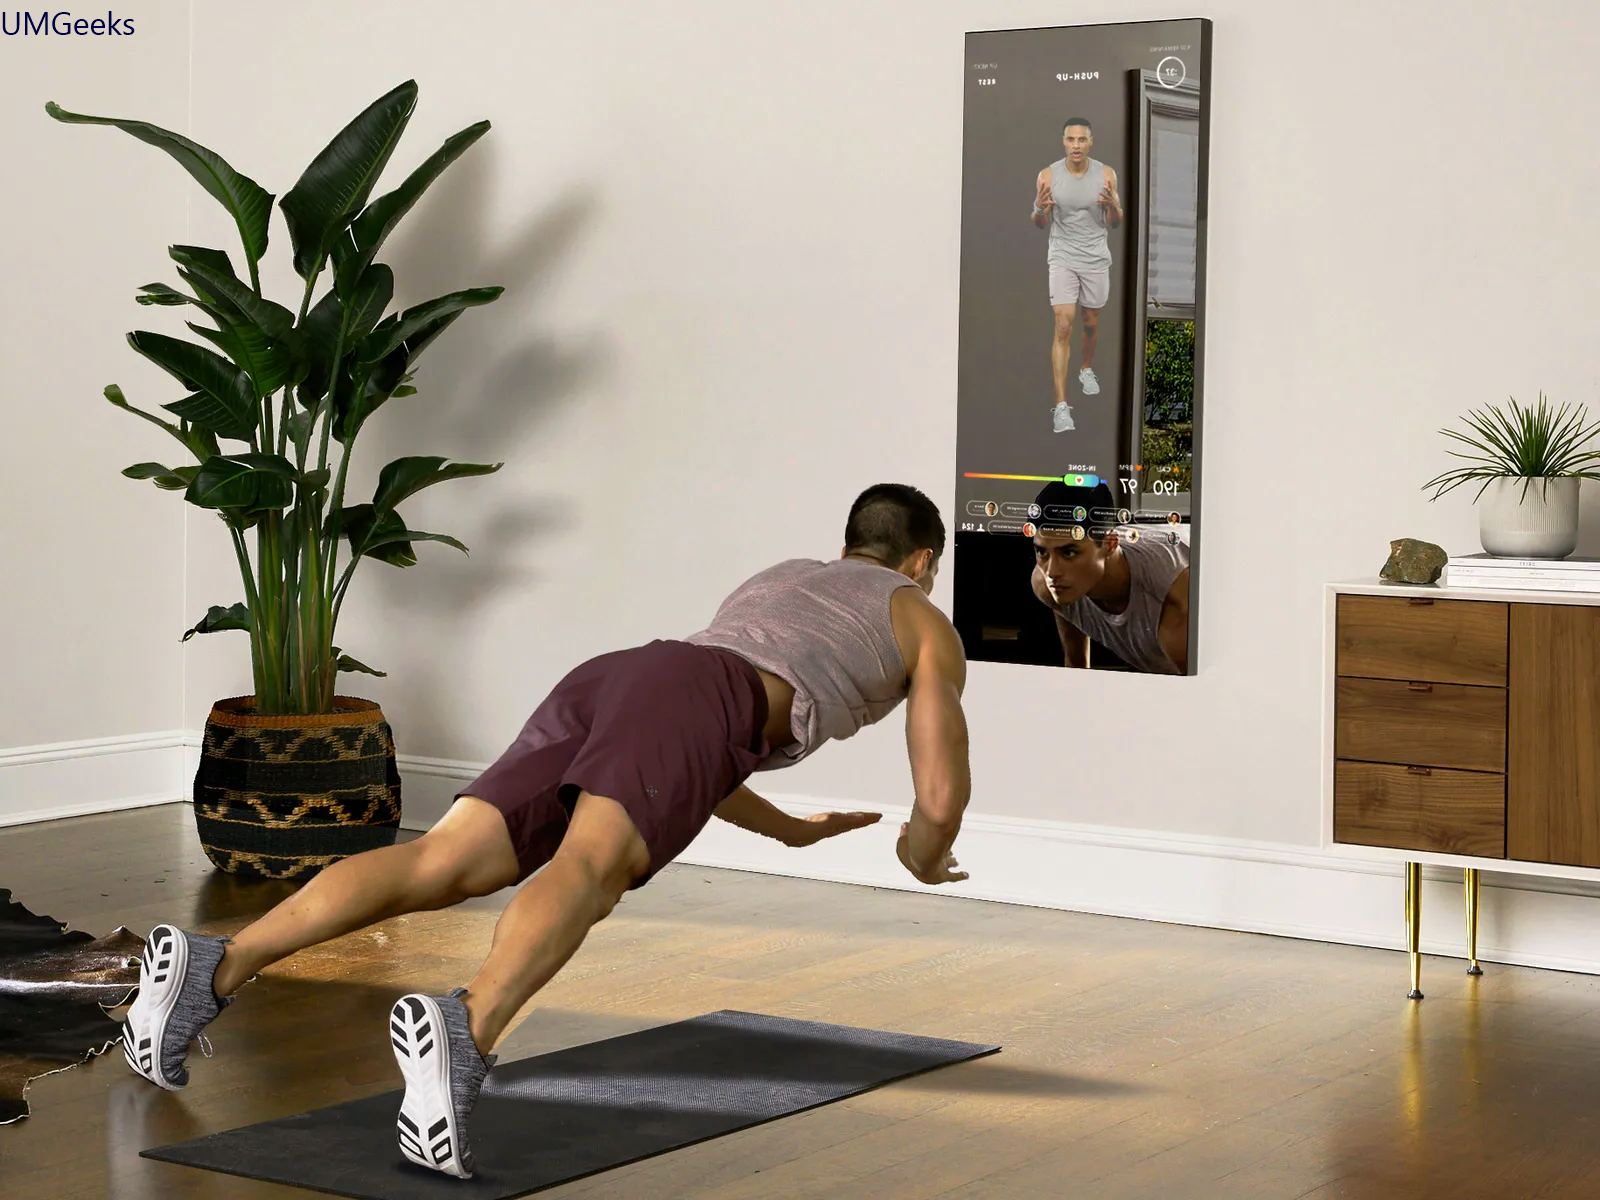 A high-tech fitness mirror that aims to get you more exercise